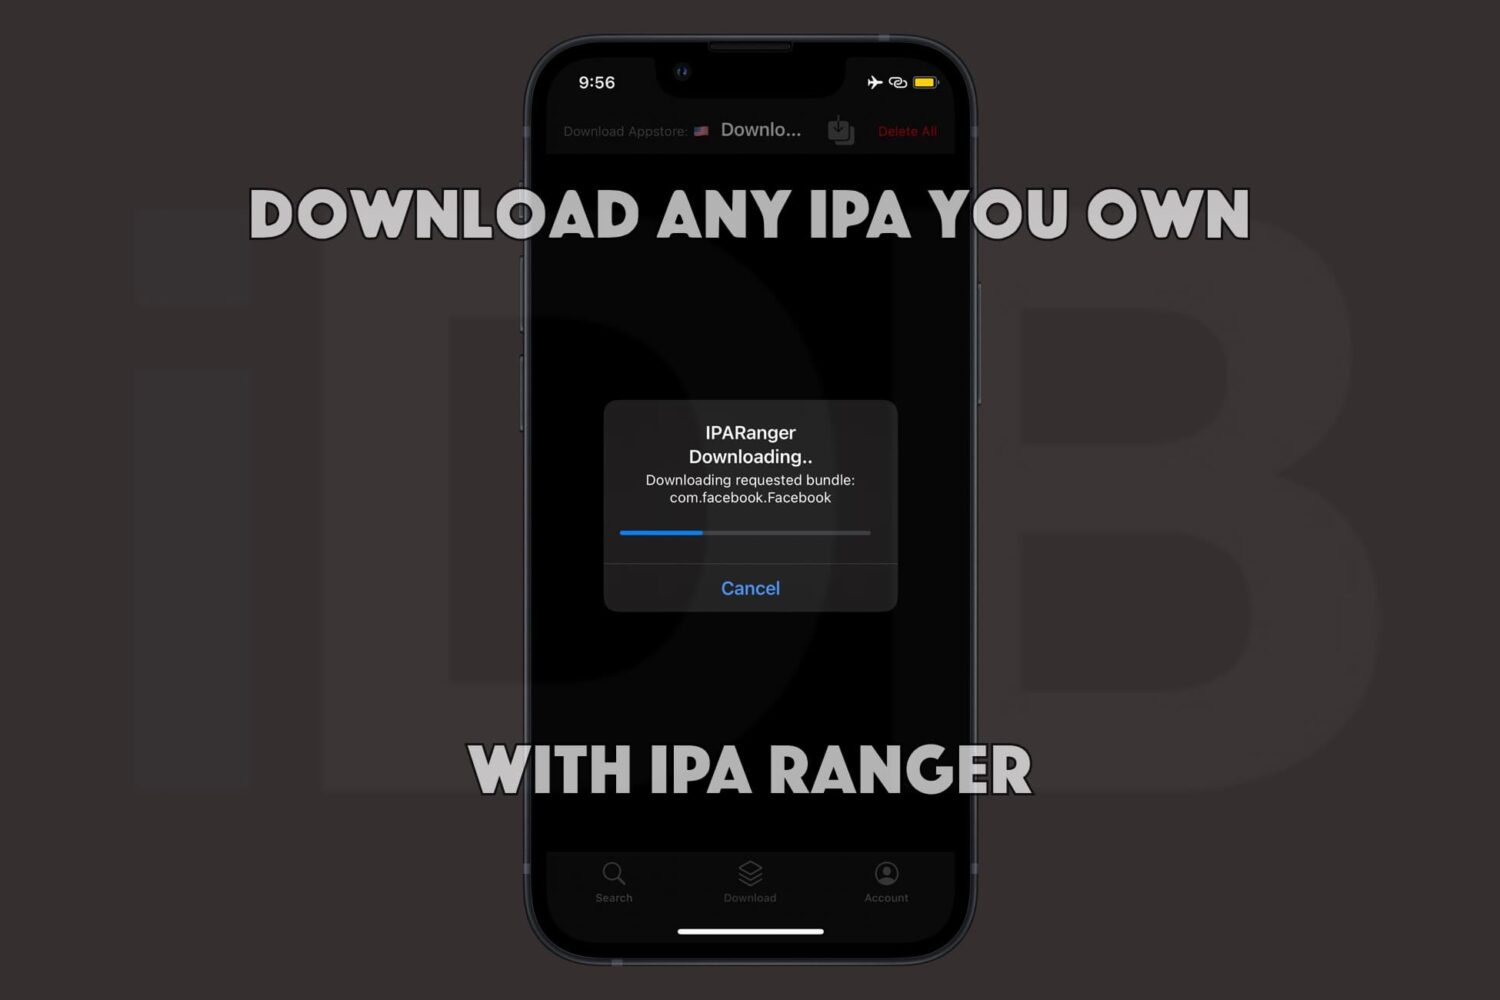 How to use IPA Ranger